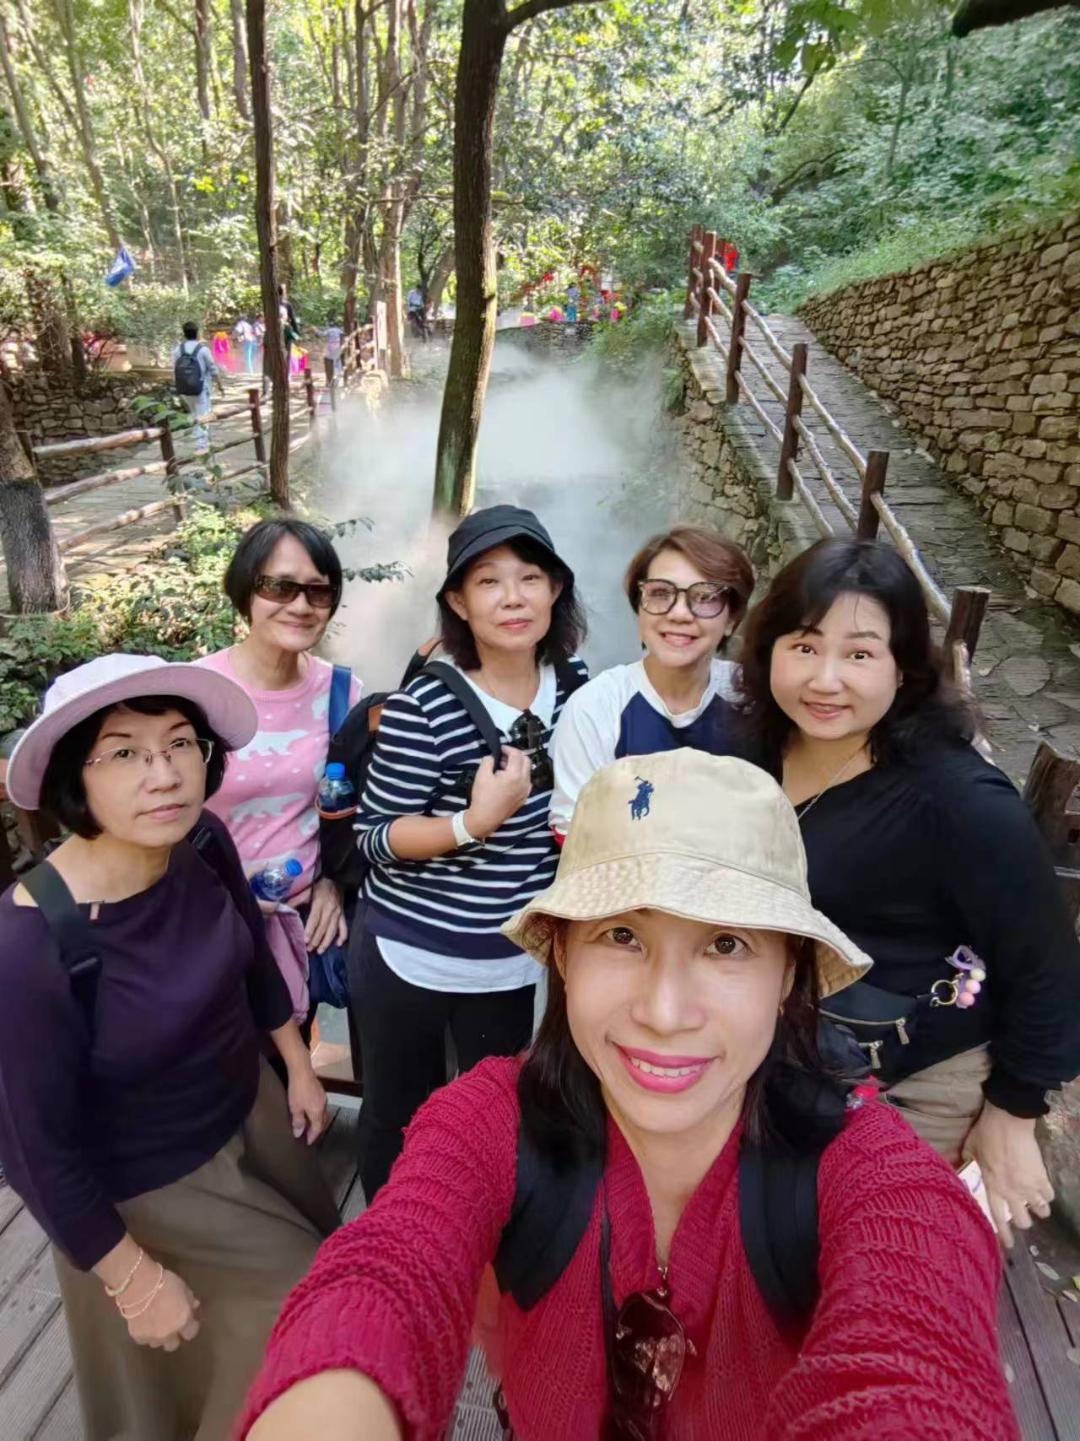 The fairyland halfway up Yunqiu Mountain is so dreamlike that beauties can’t help but take selfies.